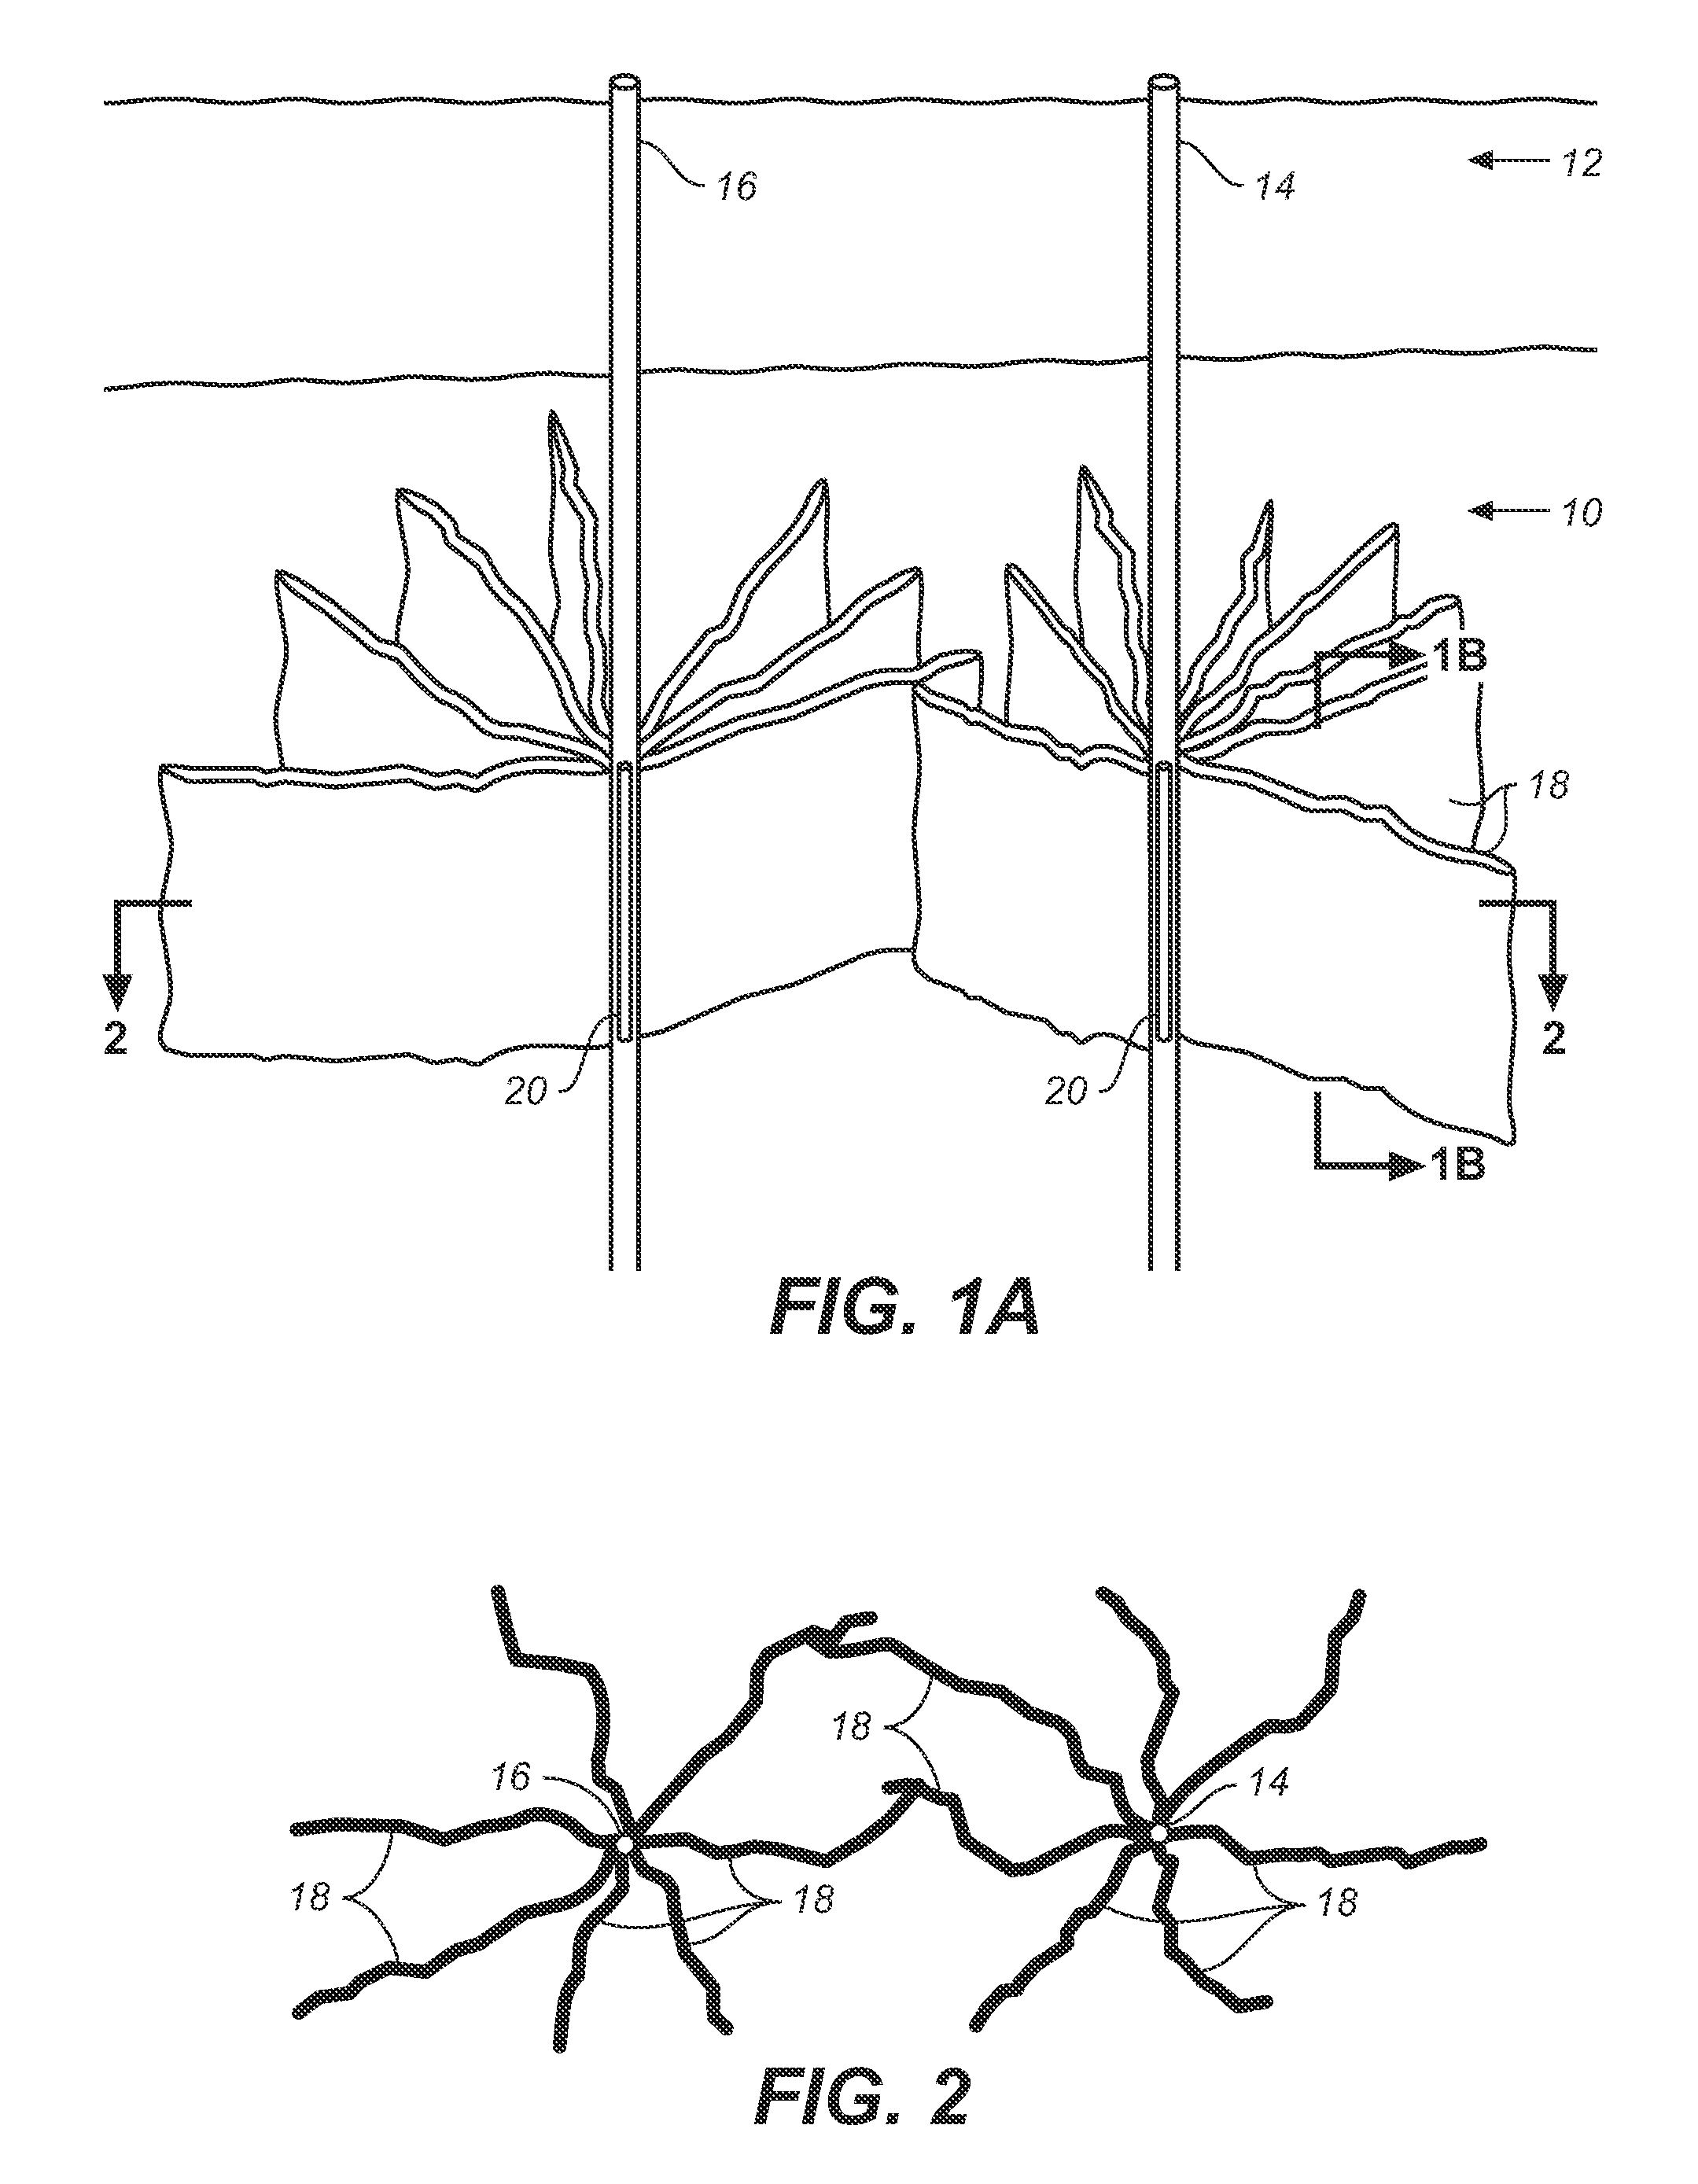 Process for two-step fracturing of oil shale formations for production of shale oil